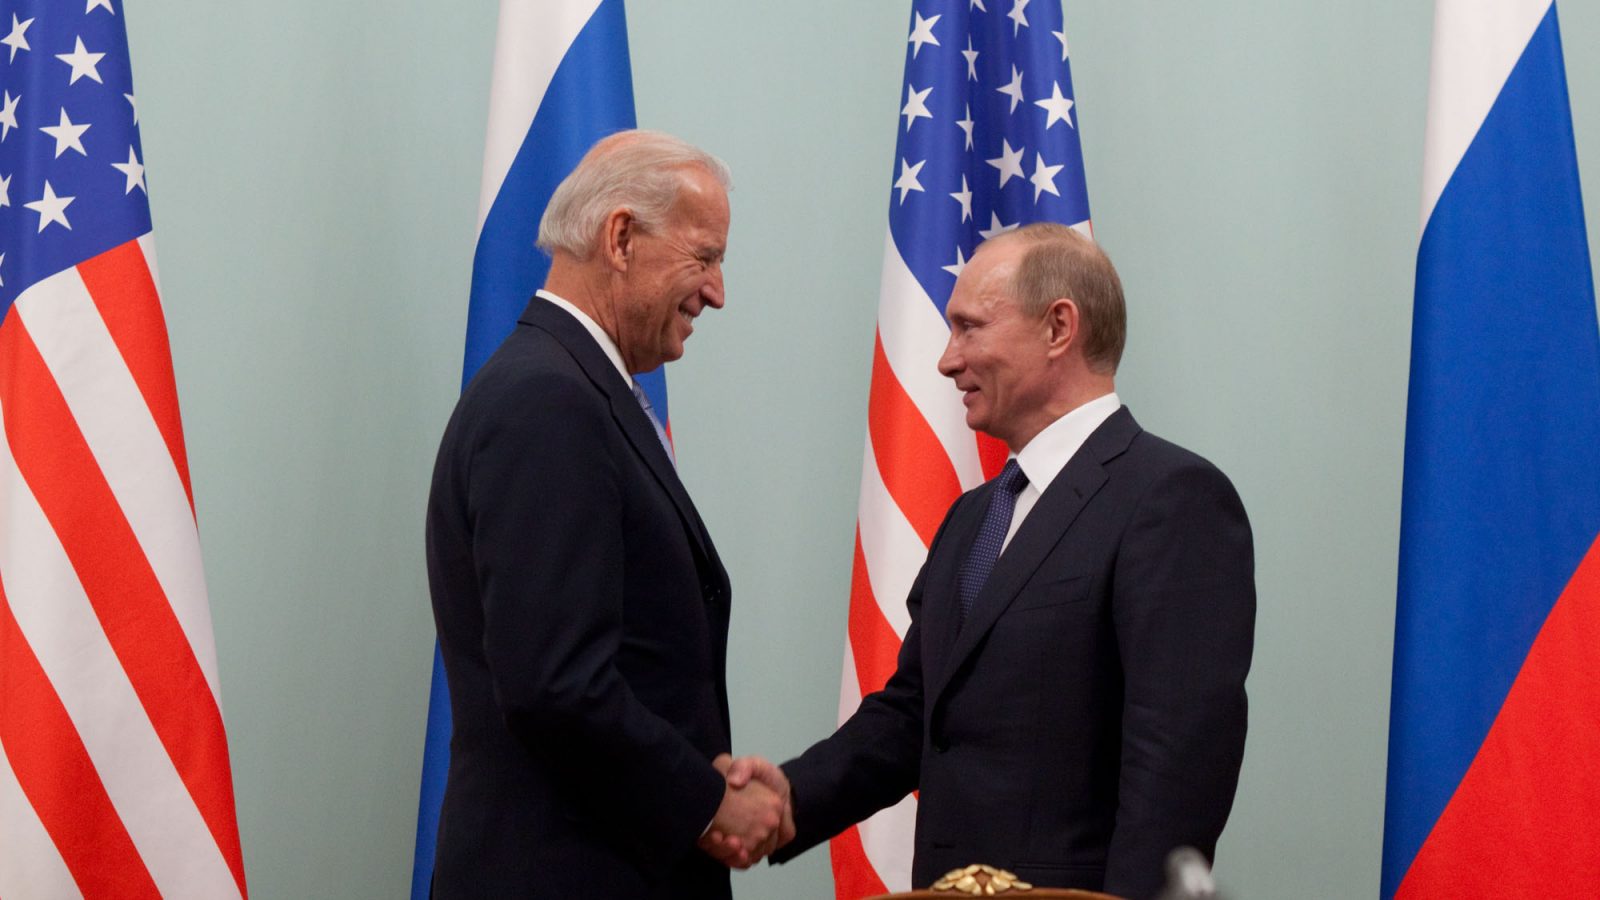 Vice President Joe Biden greets Russian Prime Minister Vladimir Putin at the Russian White House, in Moscow, Russia, March 10, 2011. (Official White House Photo by David Lienemann).